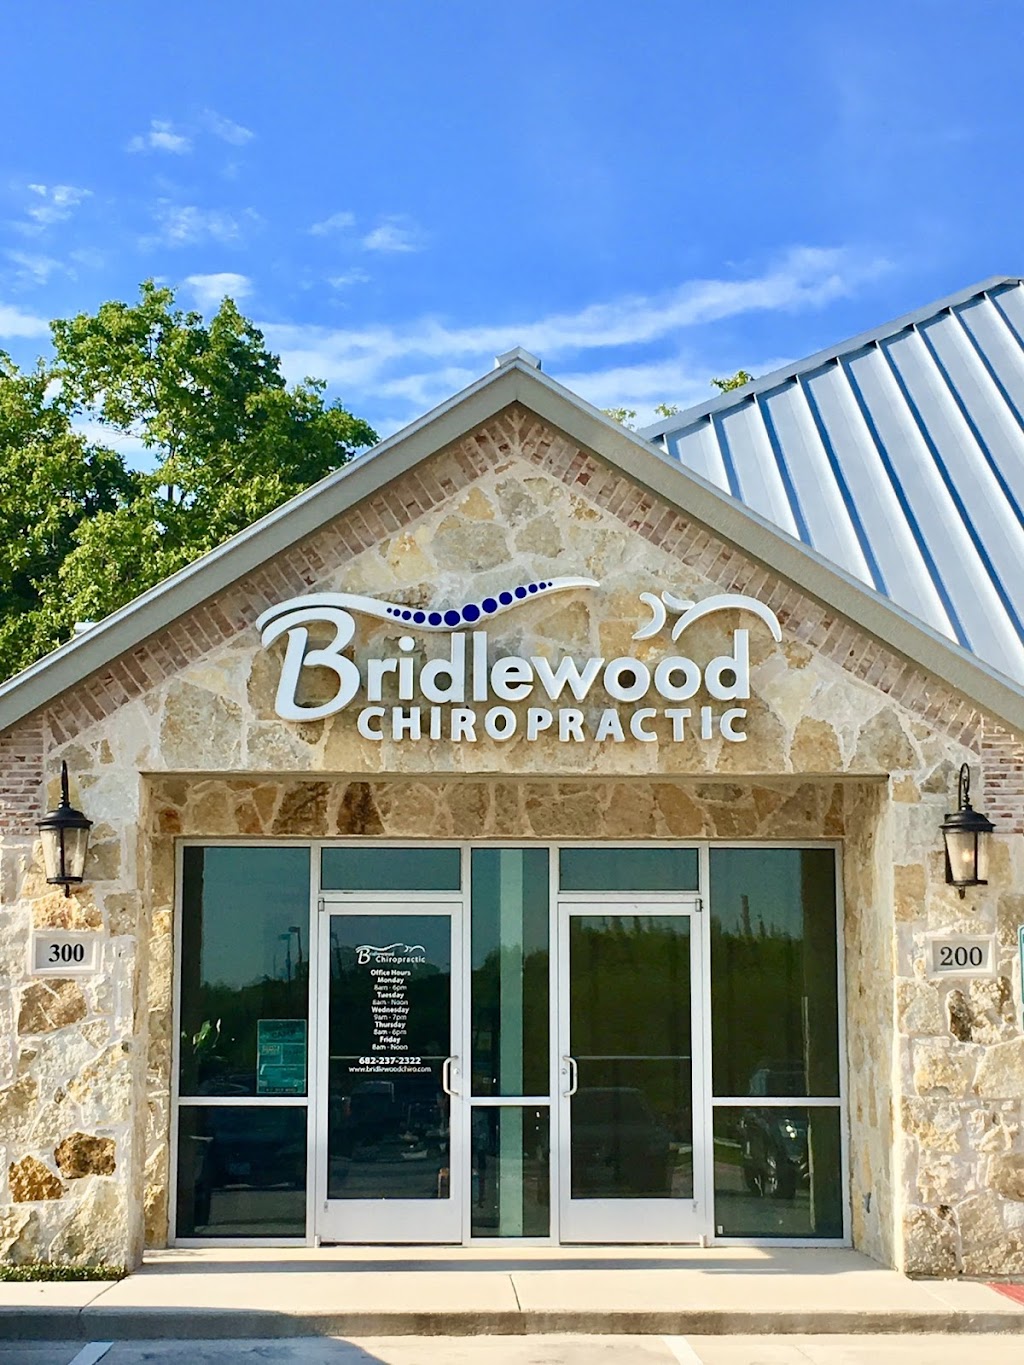 Bridlewood Chiropractic | 100 Country View Dr Suite: 300, Roanoke, TX 76262, USA | Phone: (682) 237-2322